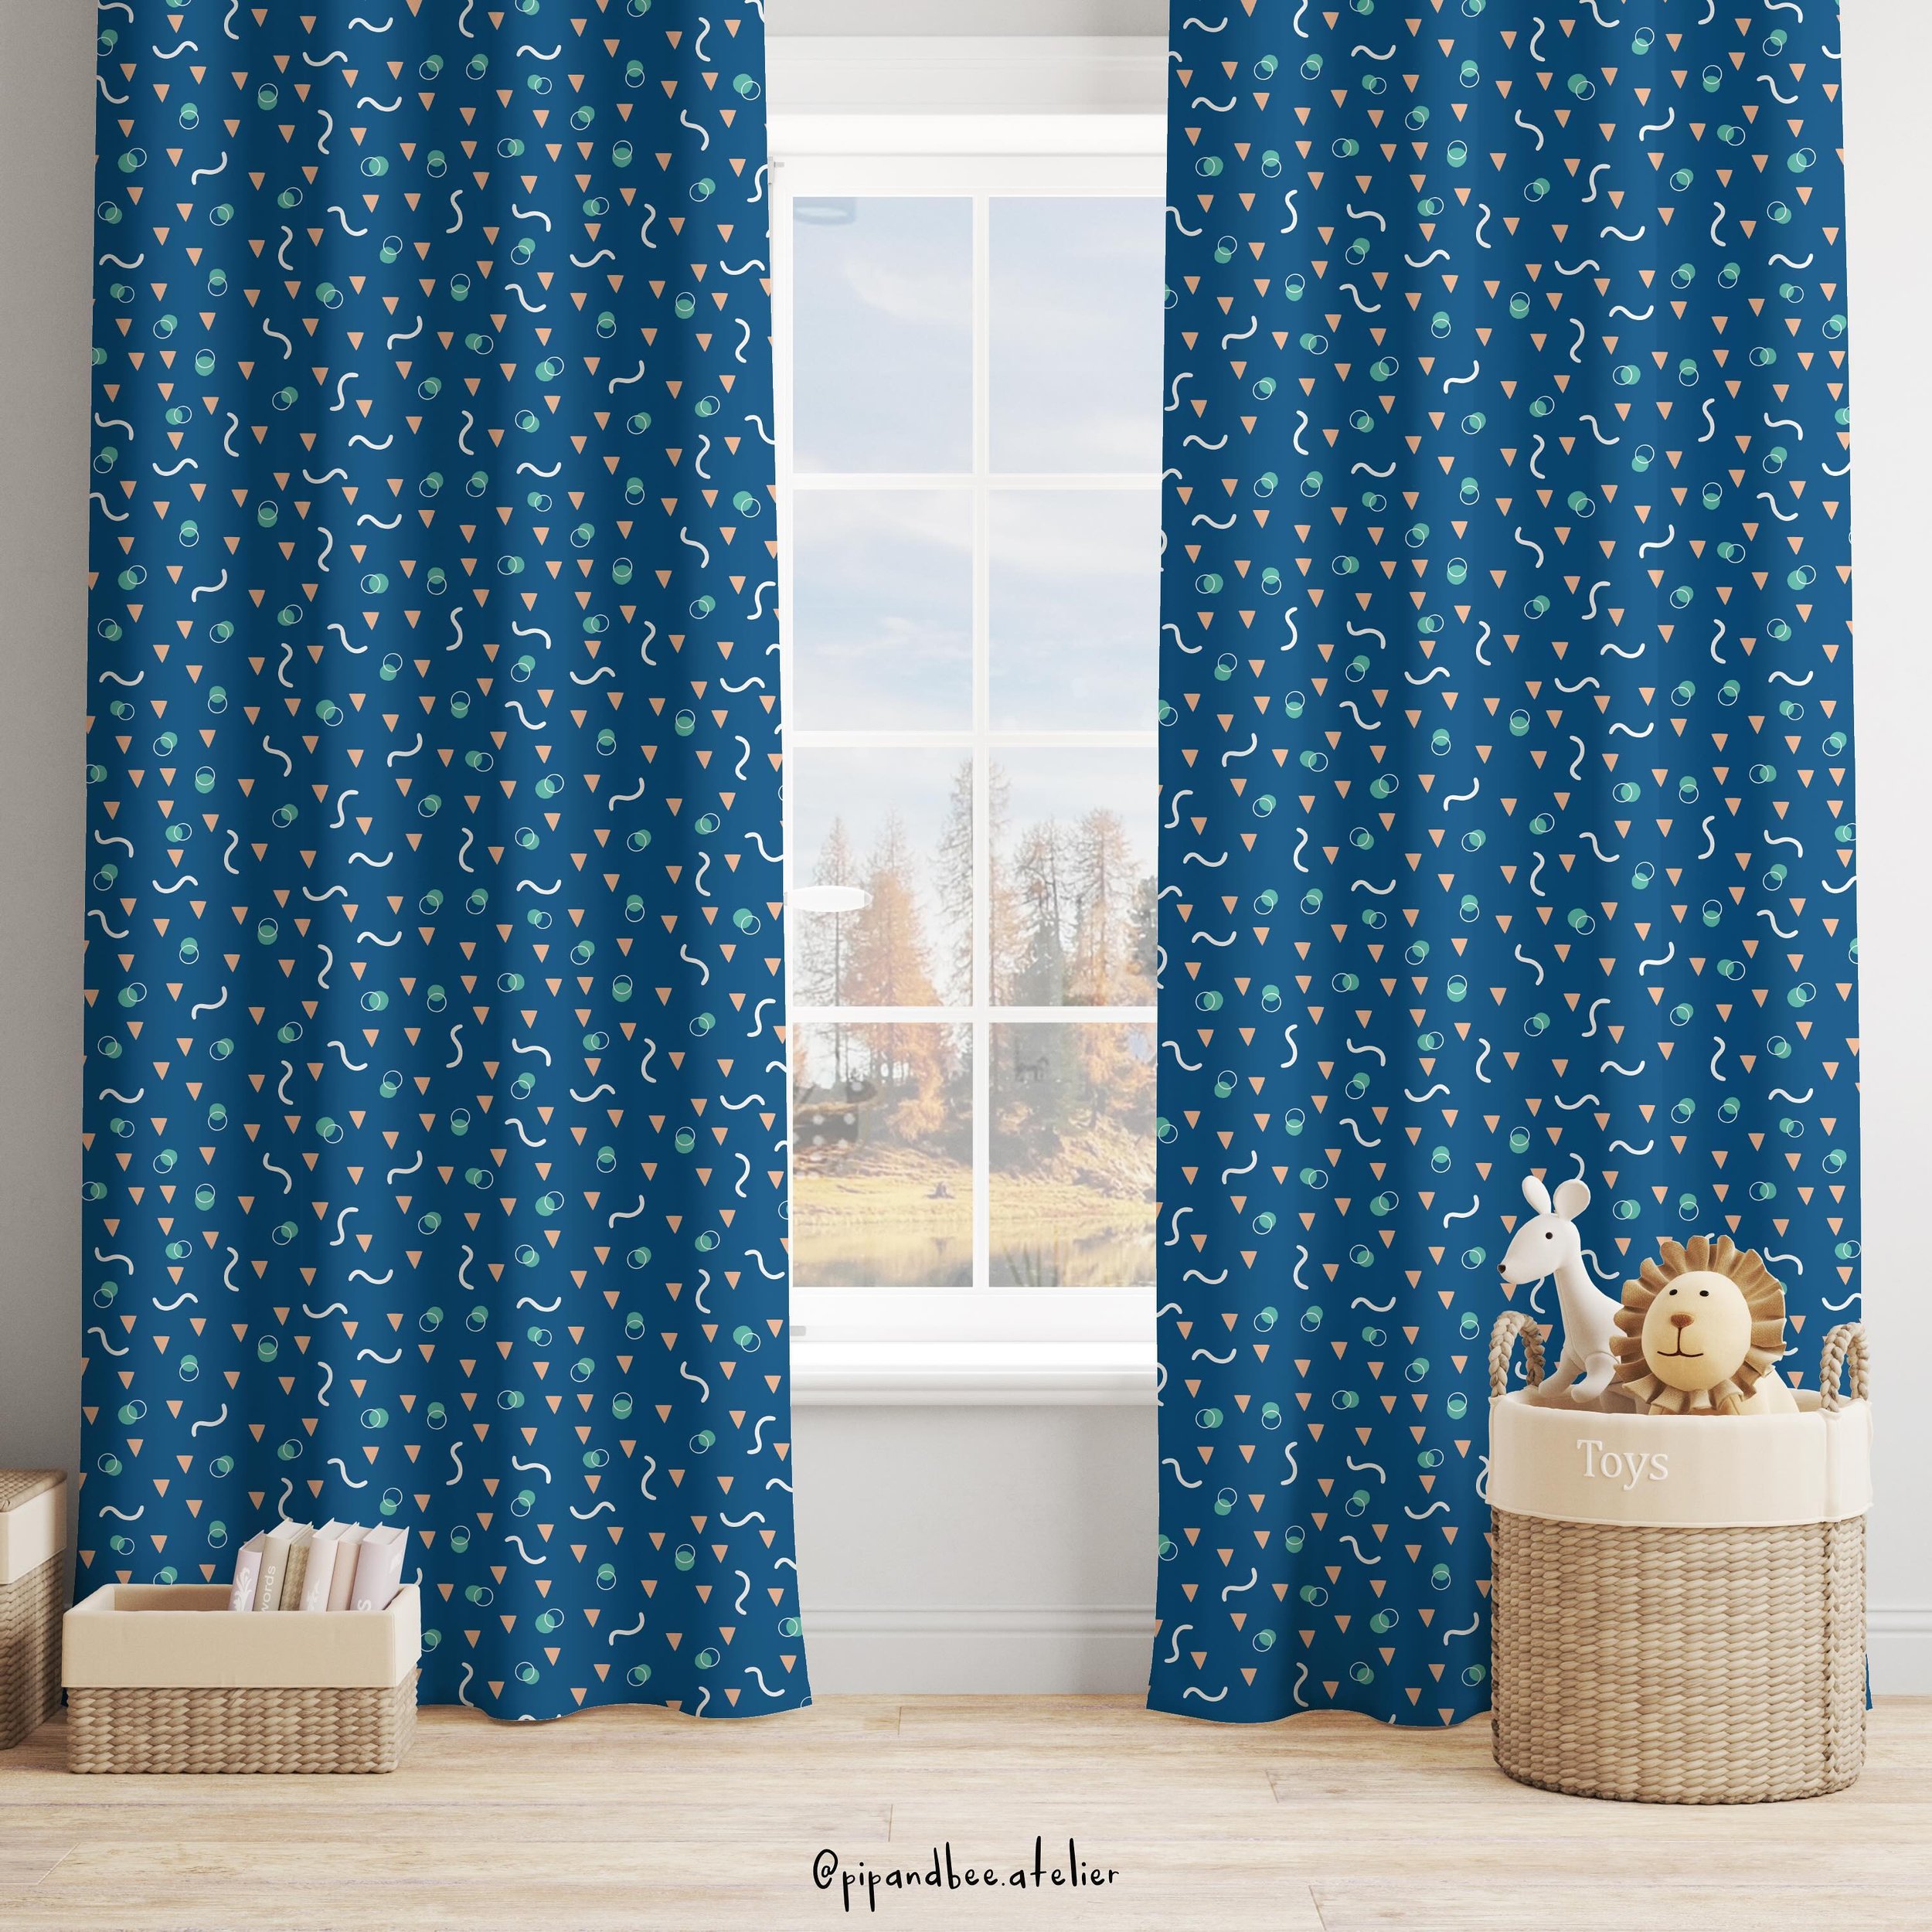 Been a while since I applied a pattern to a curtain and thought this one was perfect for a set of curtains! 

#curtains  #curtaindesign #curtainsforkids #kidsrooms #nursery #nurserydecor #nurserydesign #fabricdesigns #fabricforkids #fabriccollections